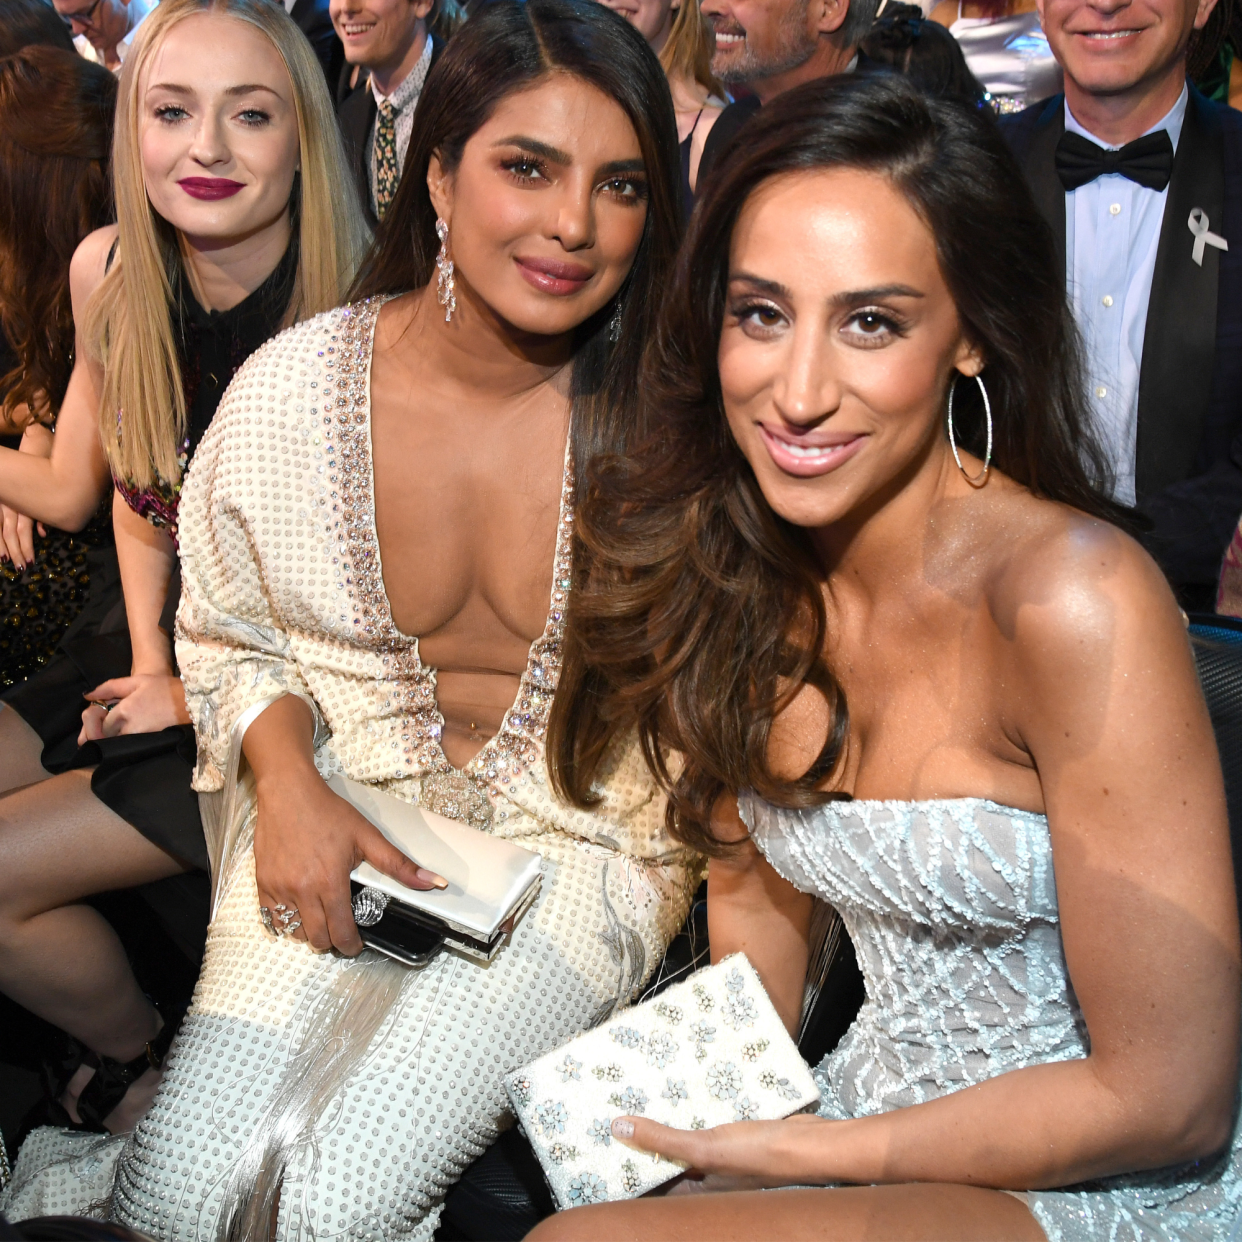  Sophie Turner, Priyanka Chopra Jonas, and Danielle Jonas during the 62nd Annual GRAMMY Awards at STAPLES Center on January 26, 2020 in Los Angeles, California 